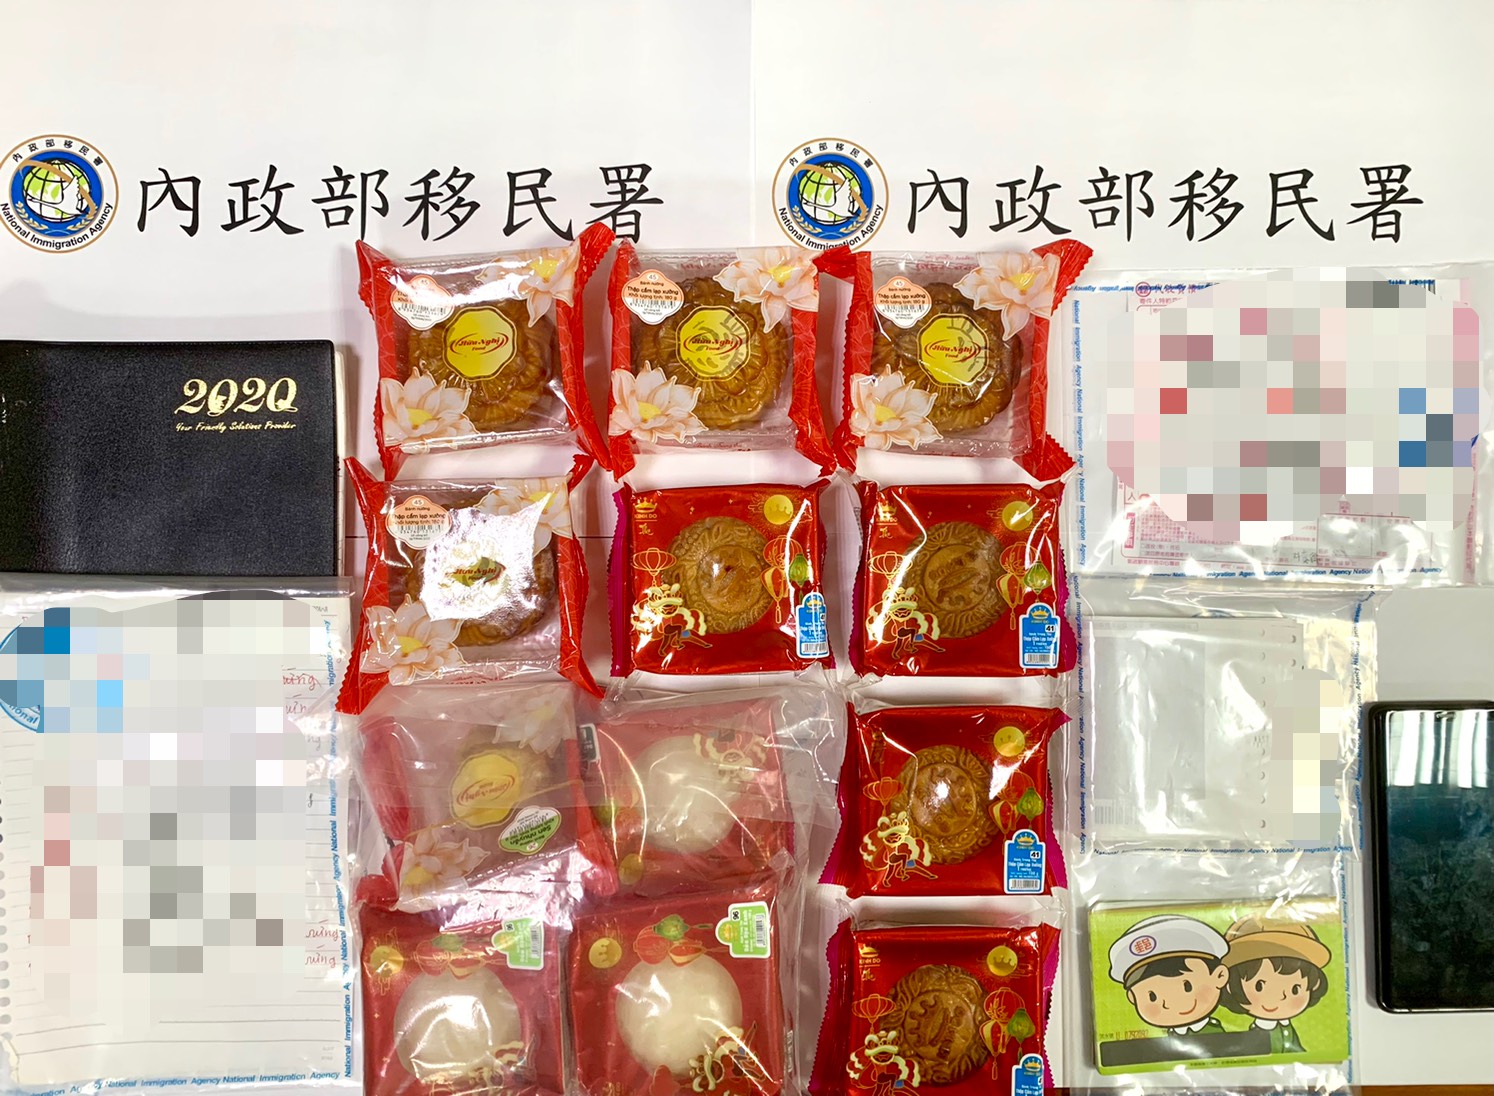 The Kaohsiung City Special Task Force, under the command of the prosecutor of the Kaohsiung District Prosecutors Office, went to the residence of Vietnamese spouse surnamed Ho to search and seize evidence such as moon cakes, account books, consignment notes and mobile phones. (Photo/Provided by the Kaohsiung City Special Task Force)